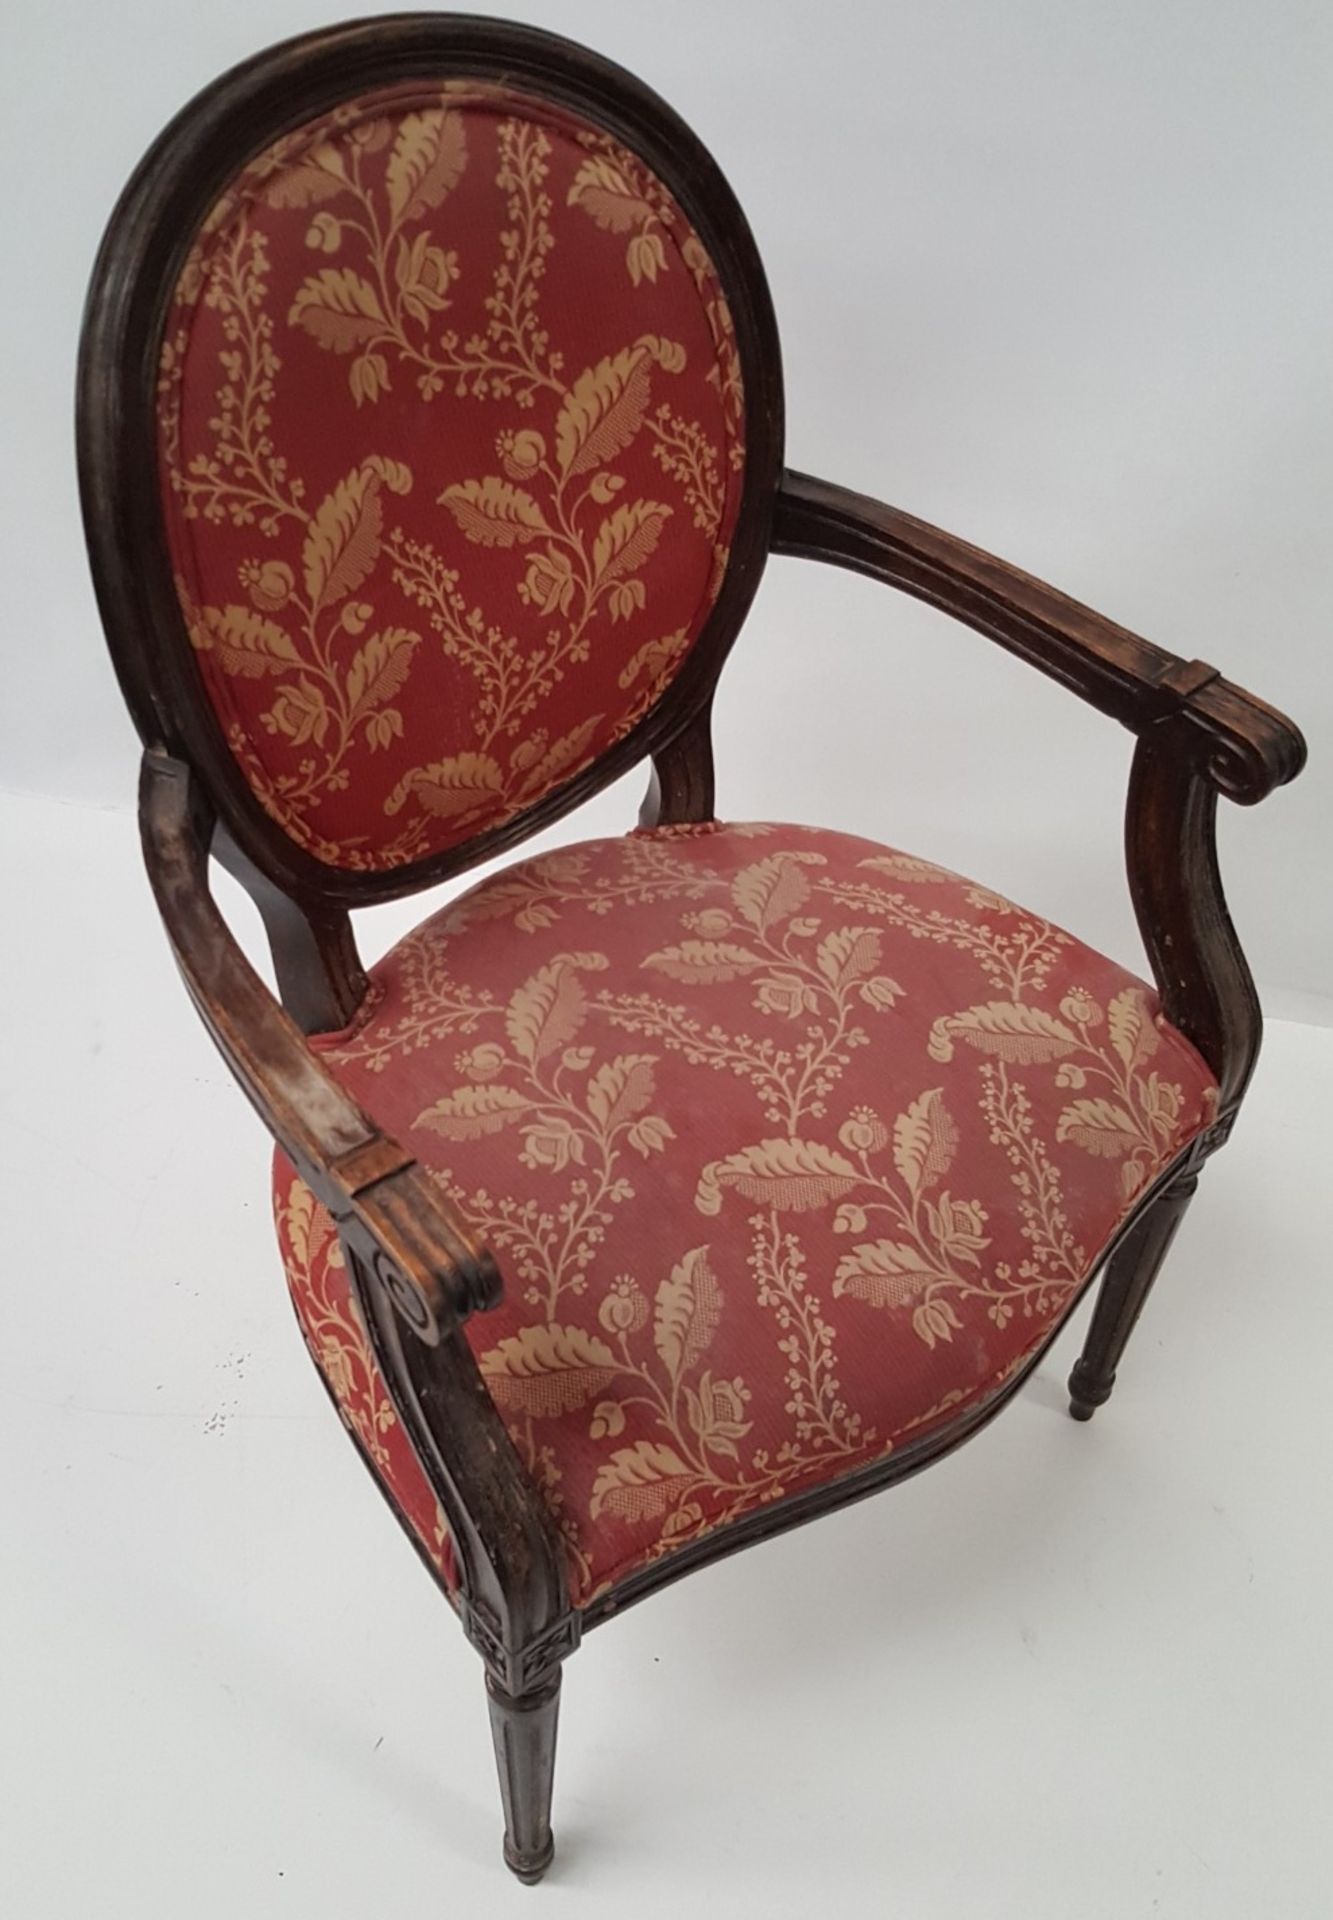 6 x Antique Style Wooden Chairs Upholstered In Red Fabric With Gold Leaf Design - CL431 - Image 8 of 8